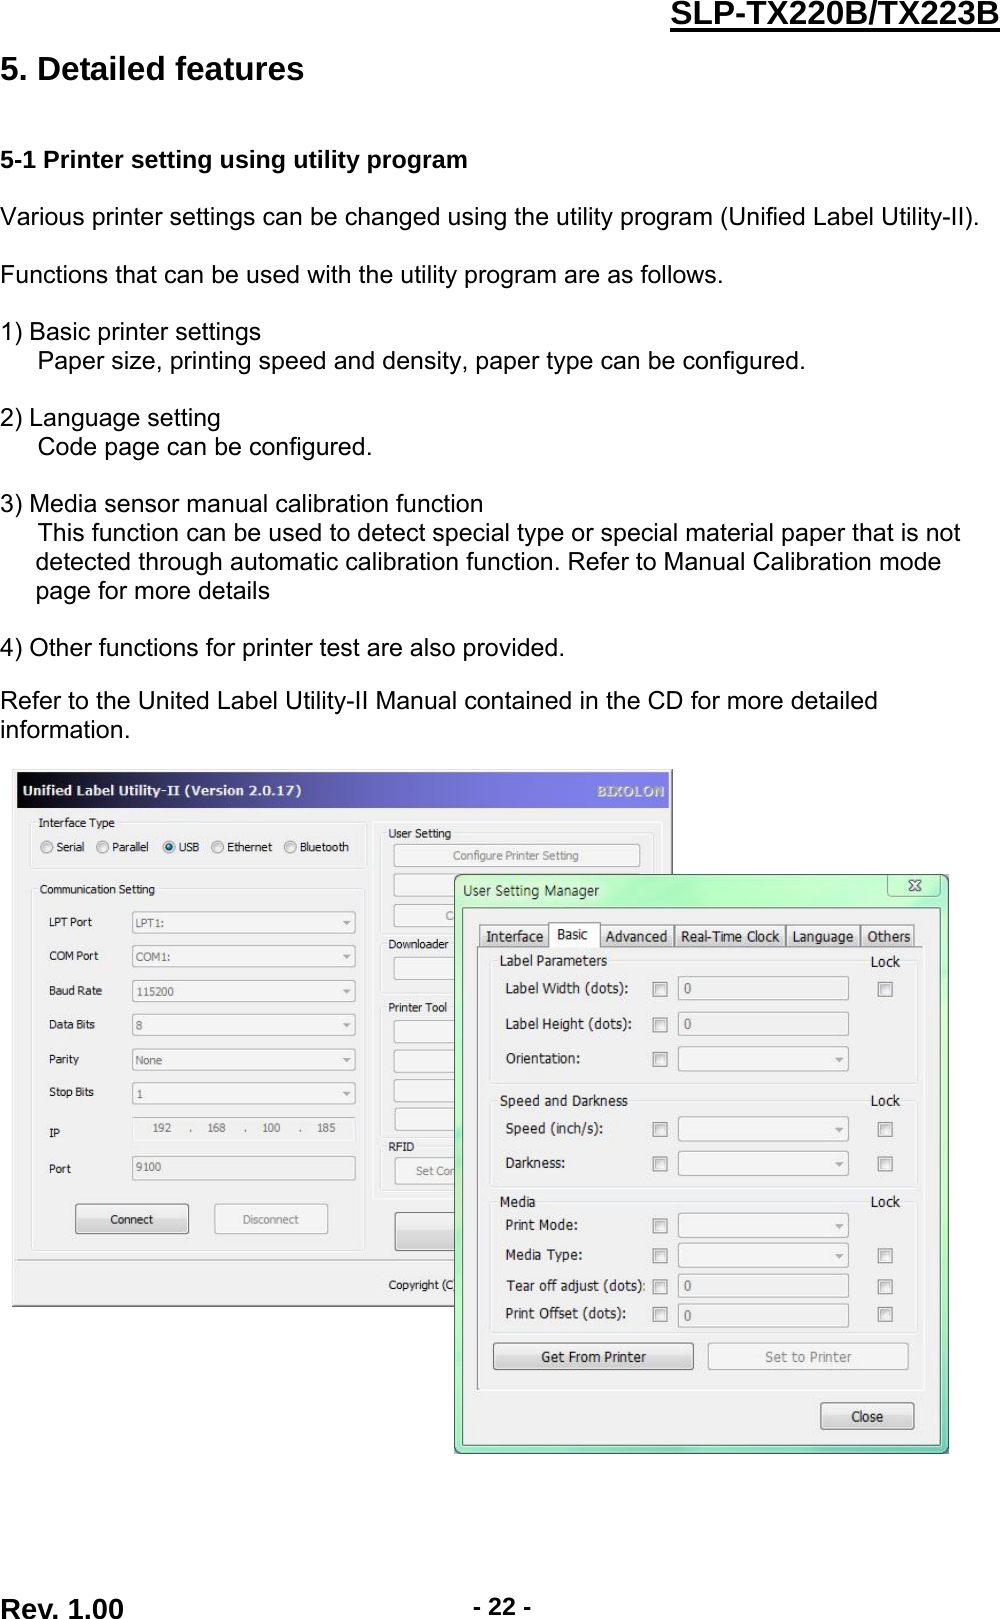  Rev. 1.00  - 22 -SLP-TX220B/TX223B5. Detailed features   5-1 Printer setting using utility program    Various printer settings can be changed using the utility program (Unified Label Utility-II).  Functions that can be used with the utility program are as follows.  1) Basic printer settings       Paper size, printing speed and density, paper type can be configured.  2) Language setting       Code page can be configured.    3) Media sensor manual calibration function       This function can be used to detect special type or special material paper that is not   detected through automatic calibration function. Refer to Manual Calibration mode   page for more details  4) Other functions for printer test are also provided.  Refer to the United Label Utility-II Manual contained in the CD for more detailed information.  